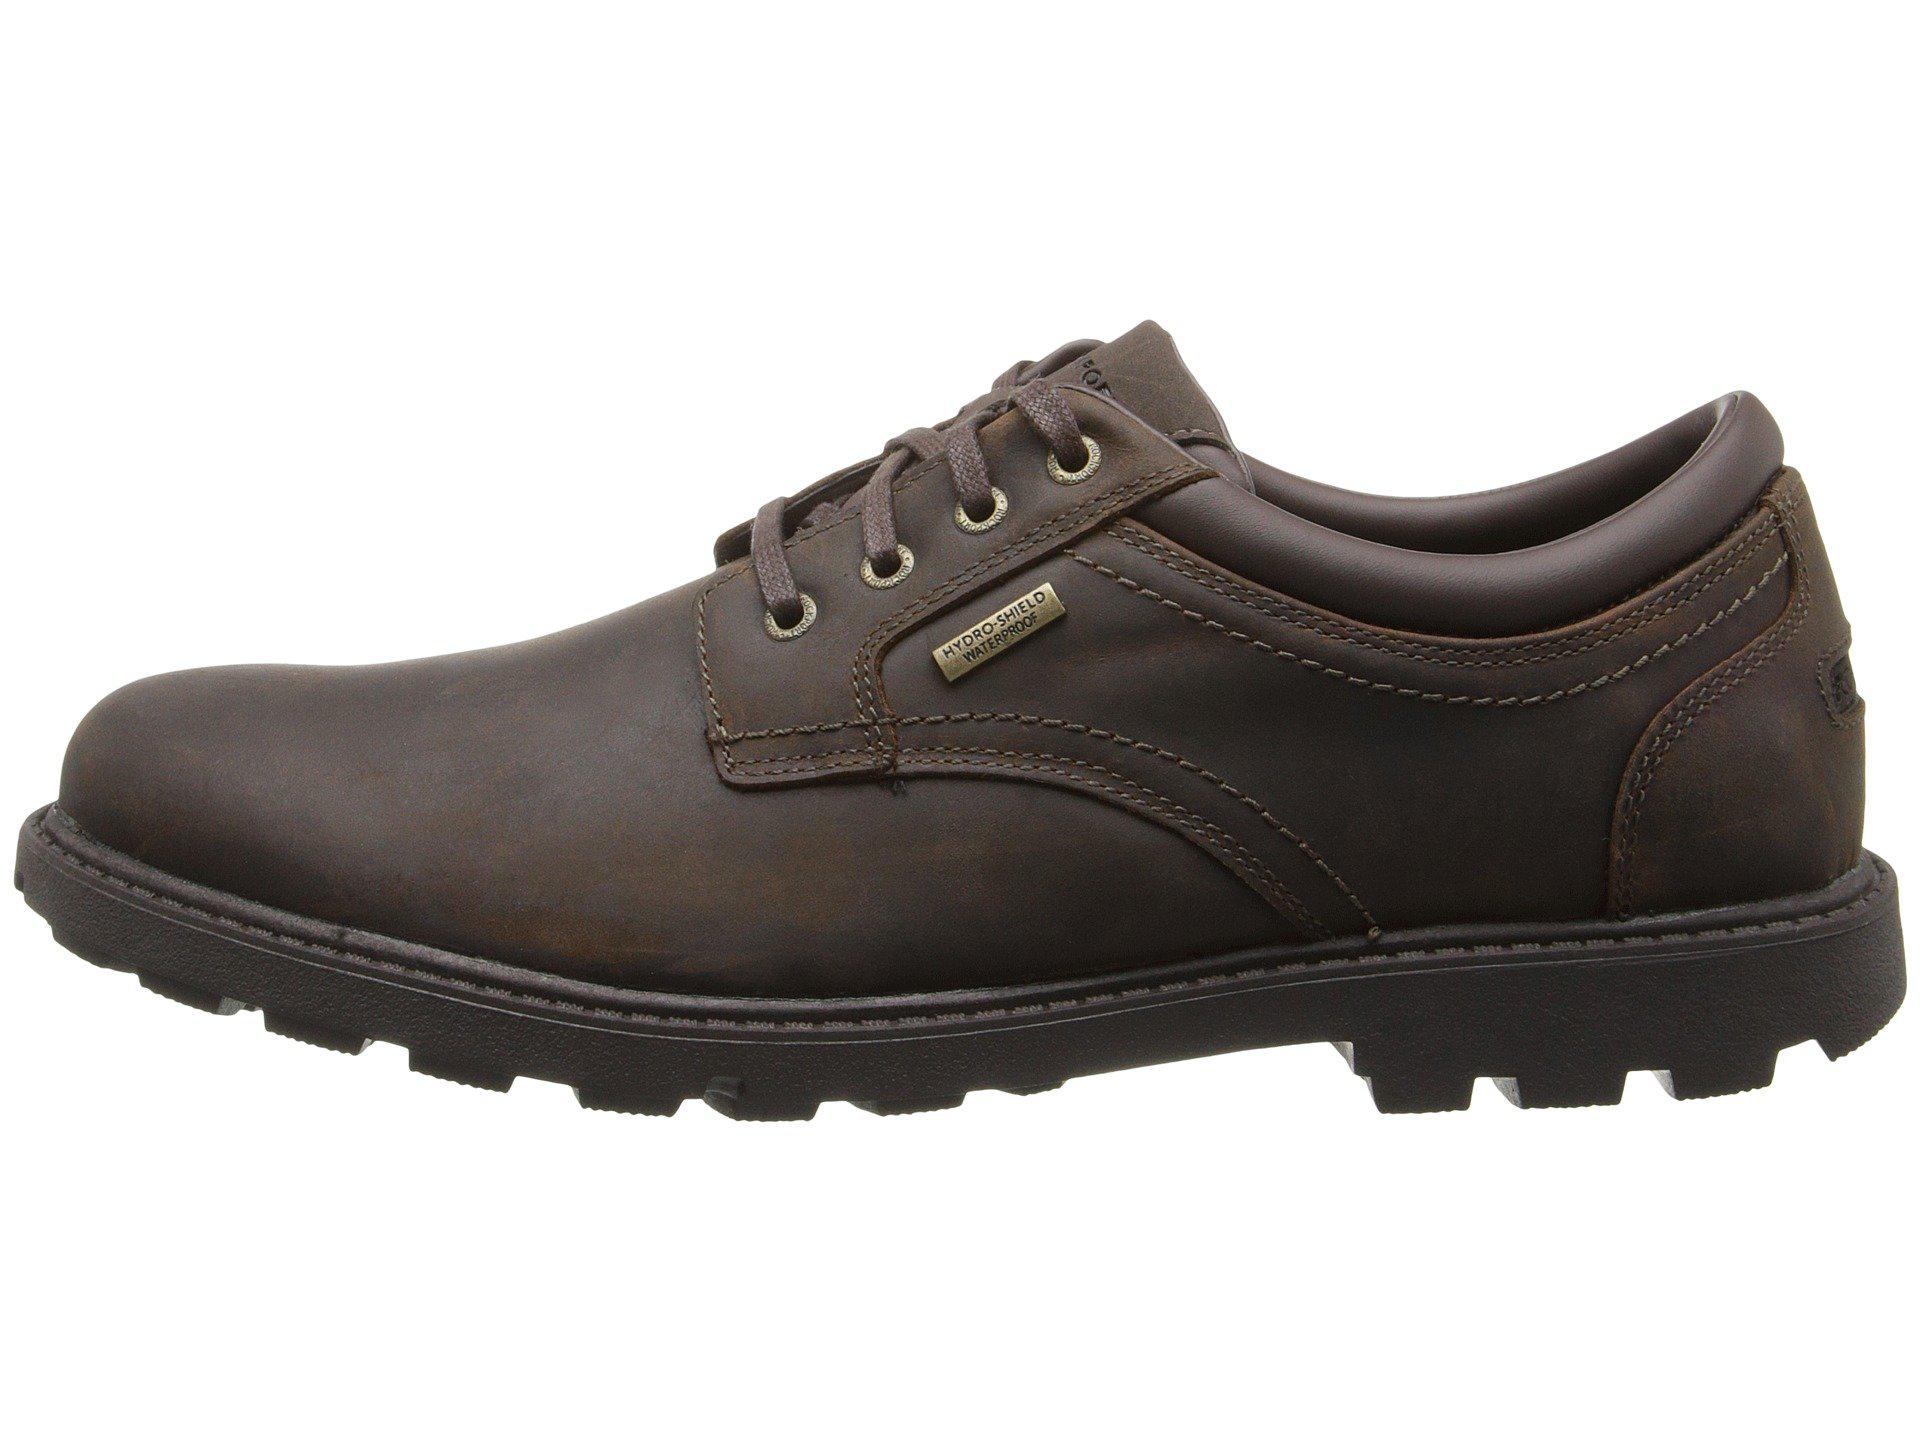 Lyst - Rockport Storm Surge Water Proof Plain Toe Oxford in Brown for Men